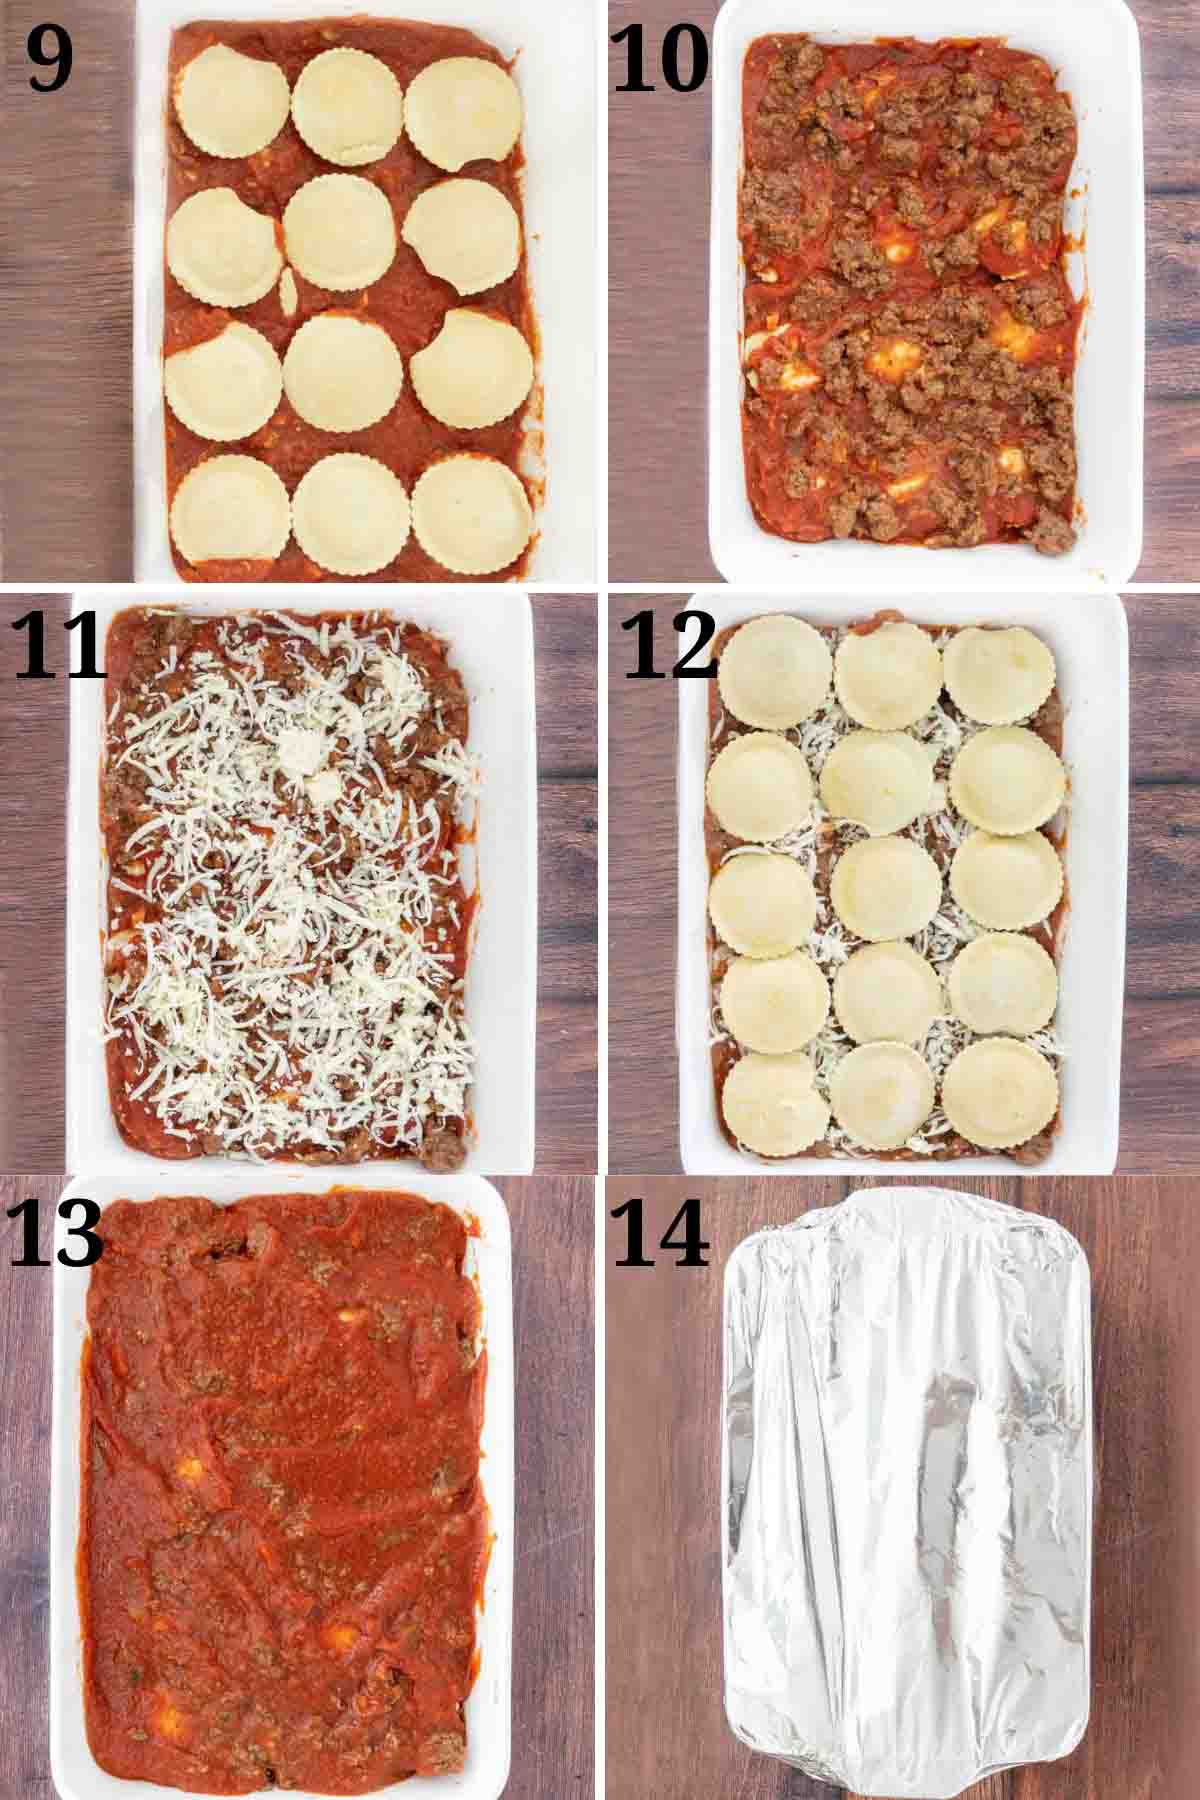 Collage showing next steps in recipe.